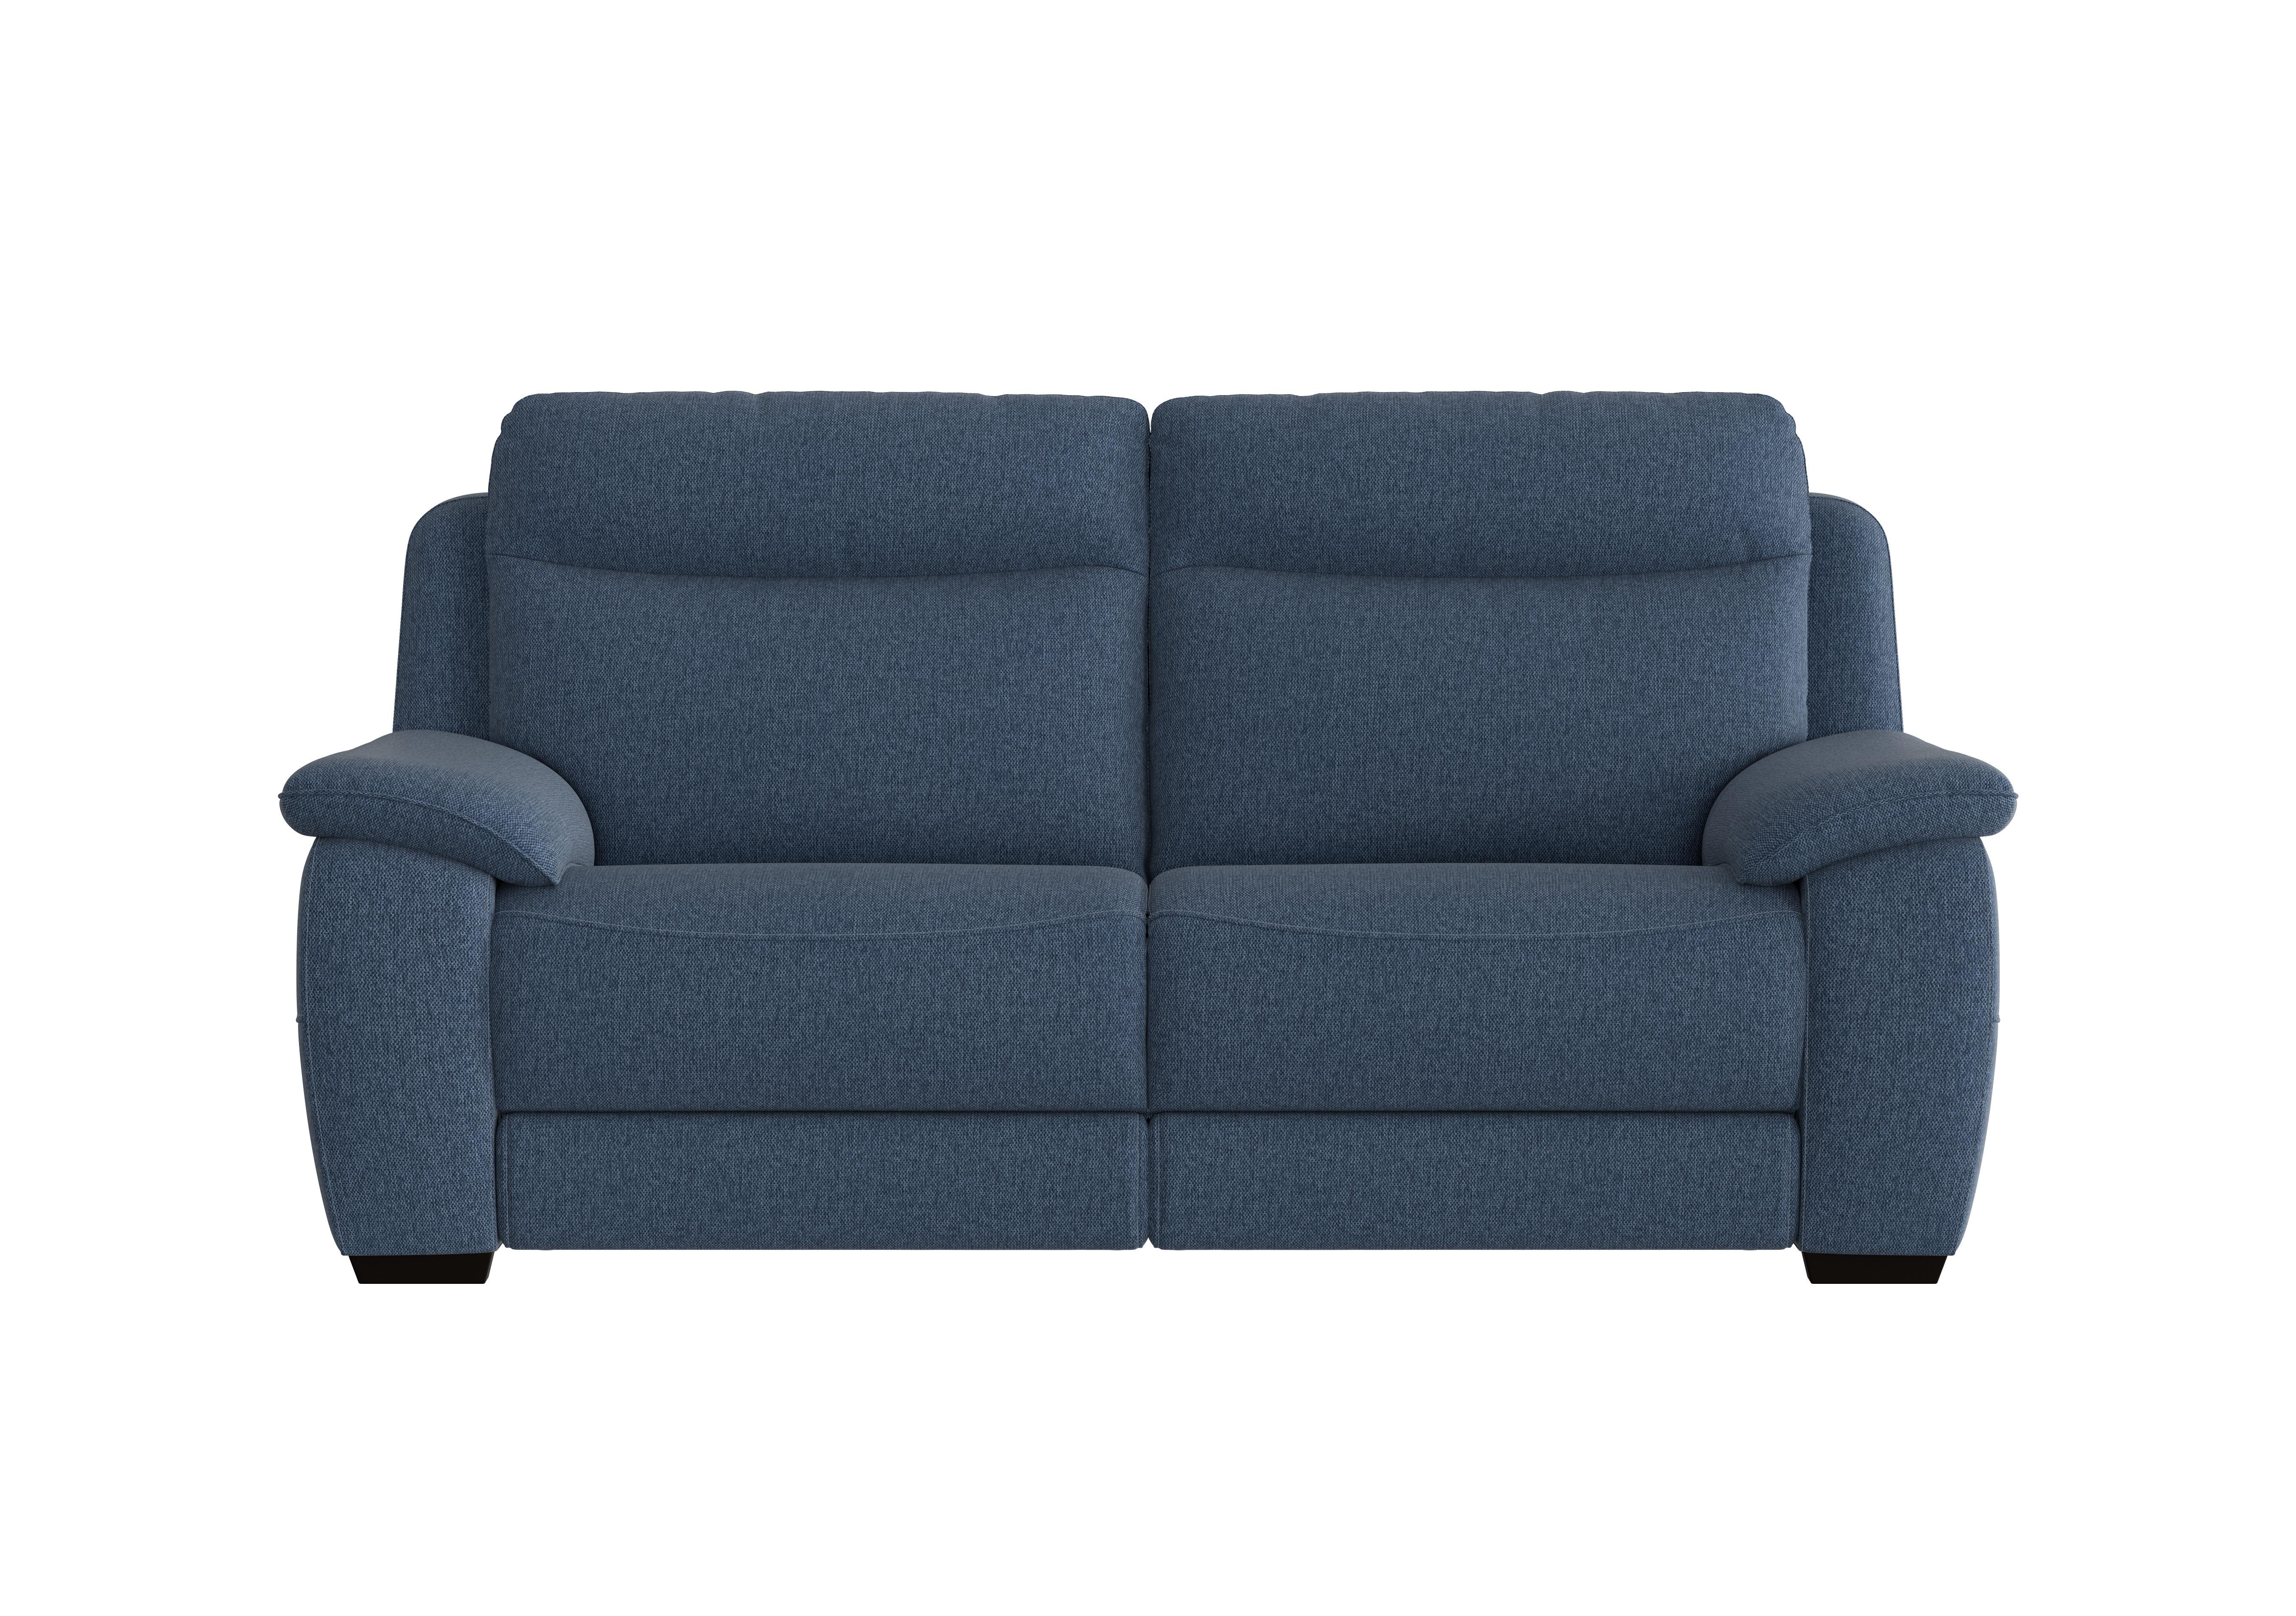 Starlight Express 3 Seater Fabric Sofa in Fab-Blt-R38 Blue on Furniture Village